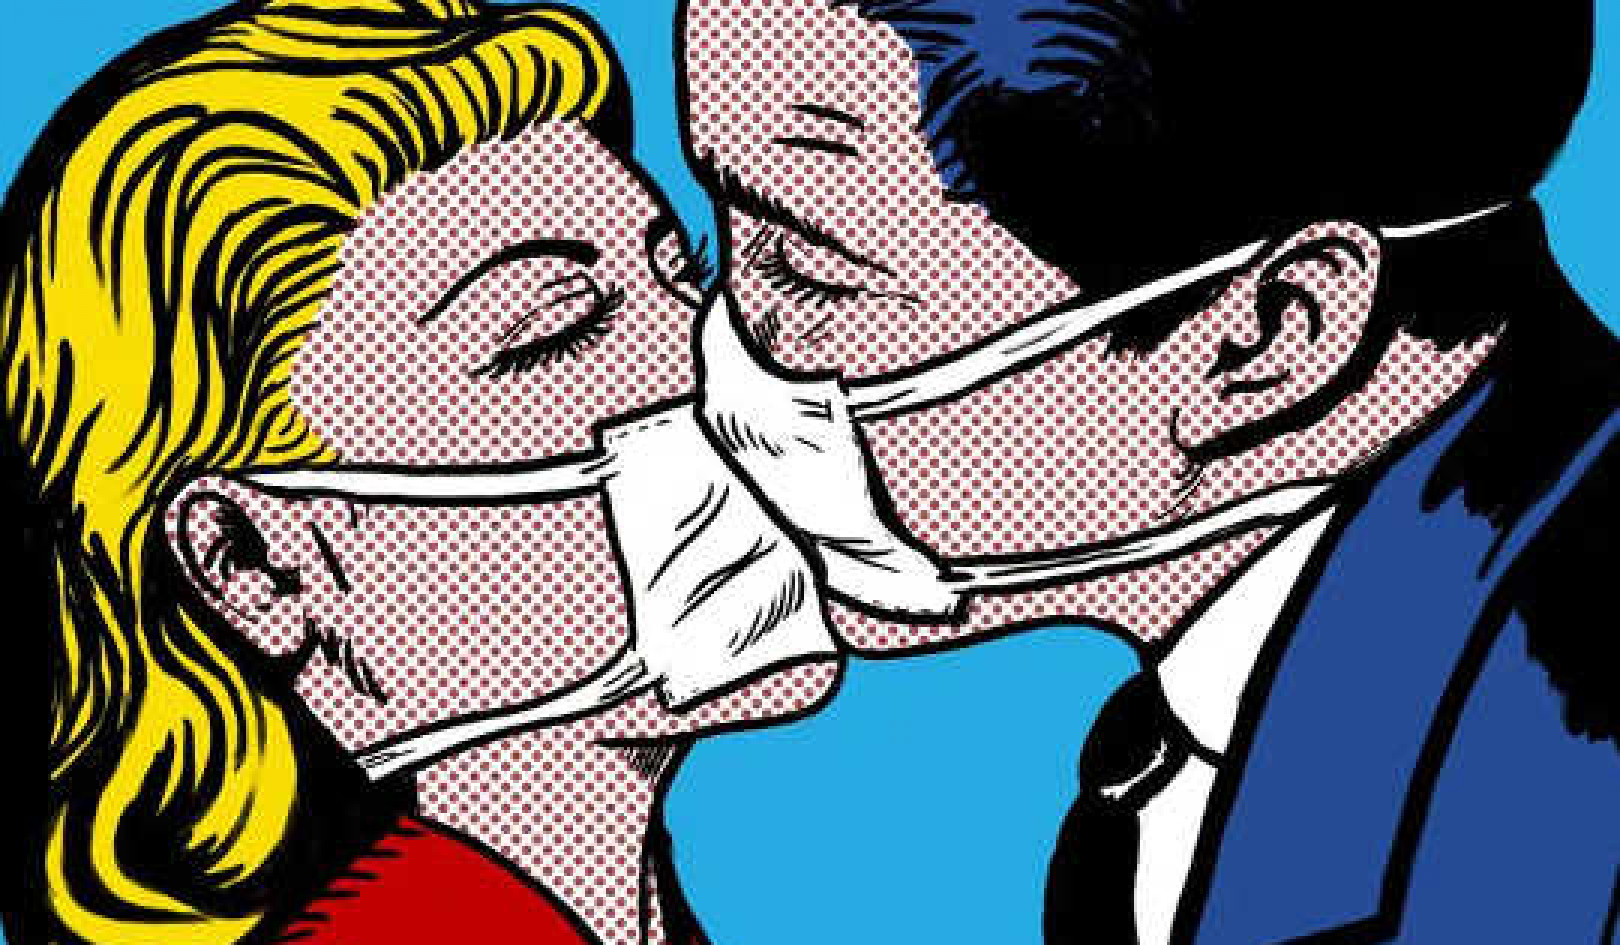 'Kissing Can Be Dangerous': How Old Advice For TB Seems Strangely Familiar Today